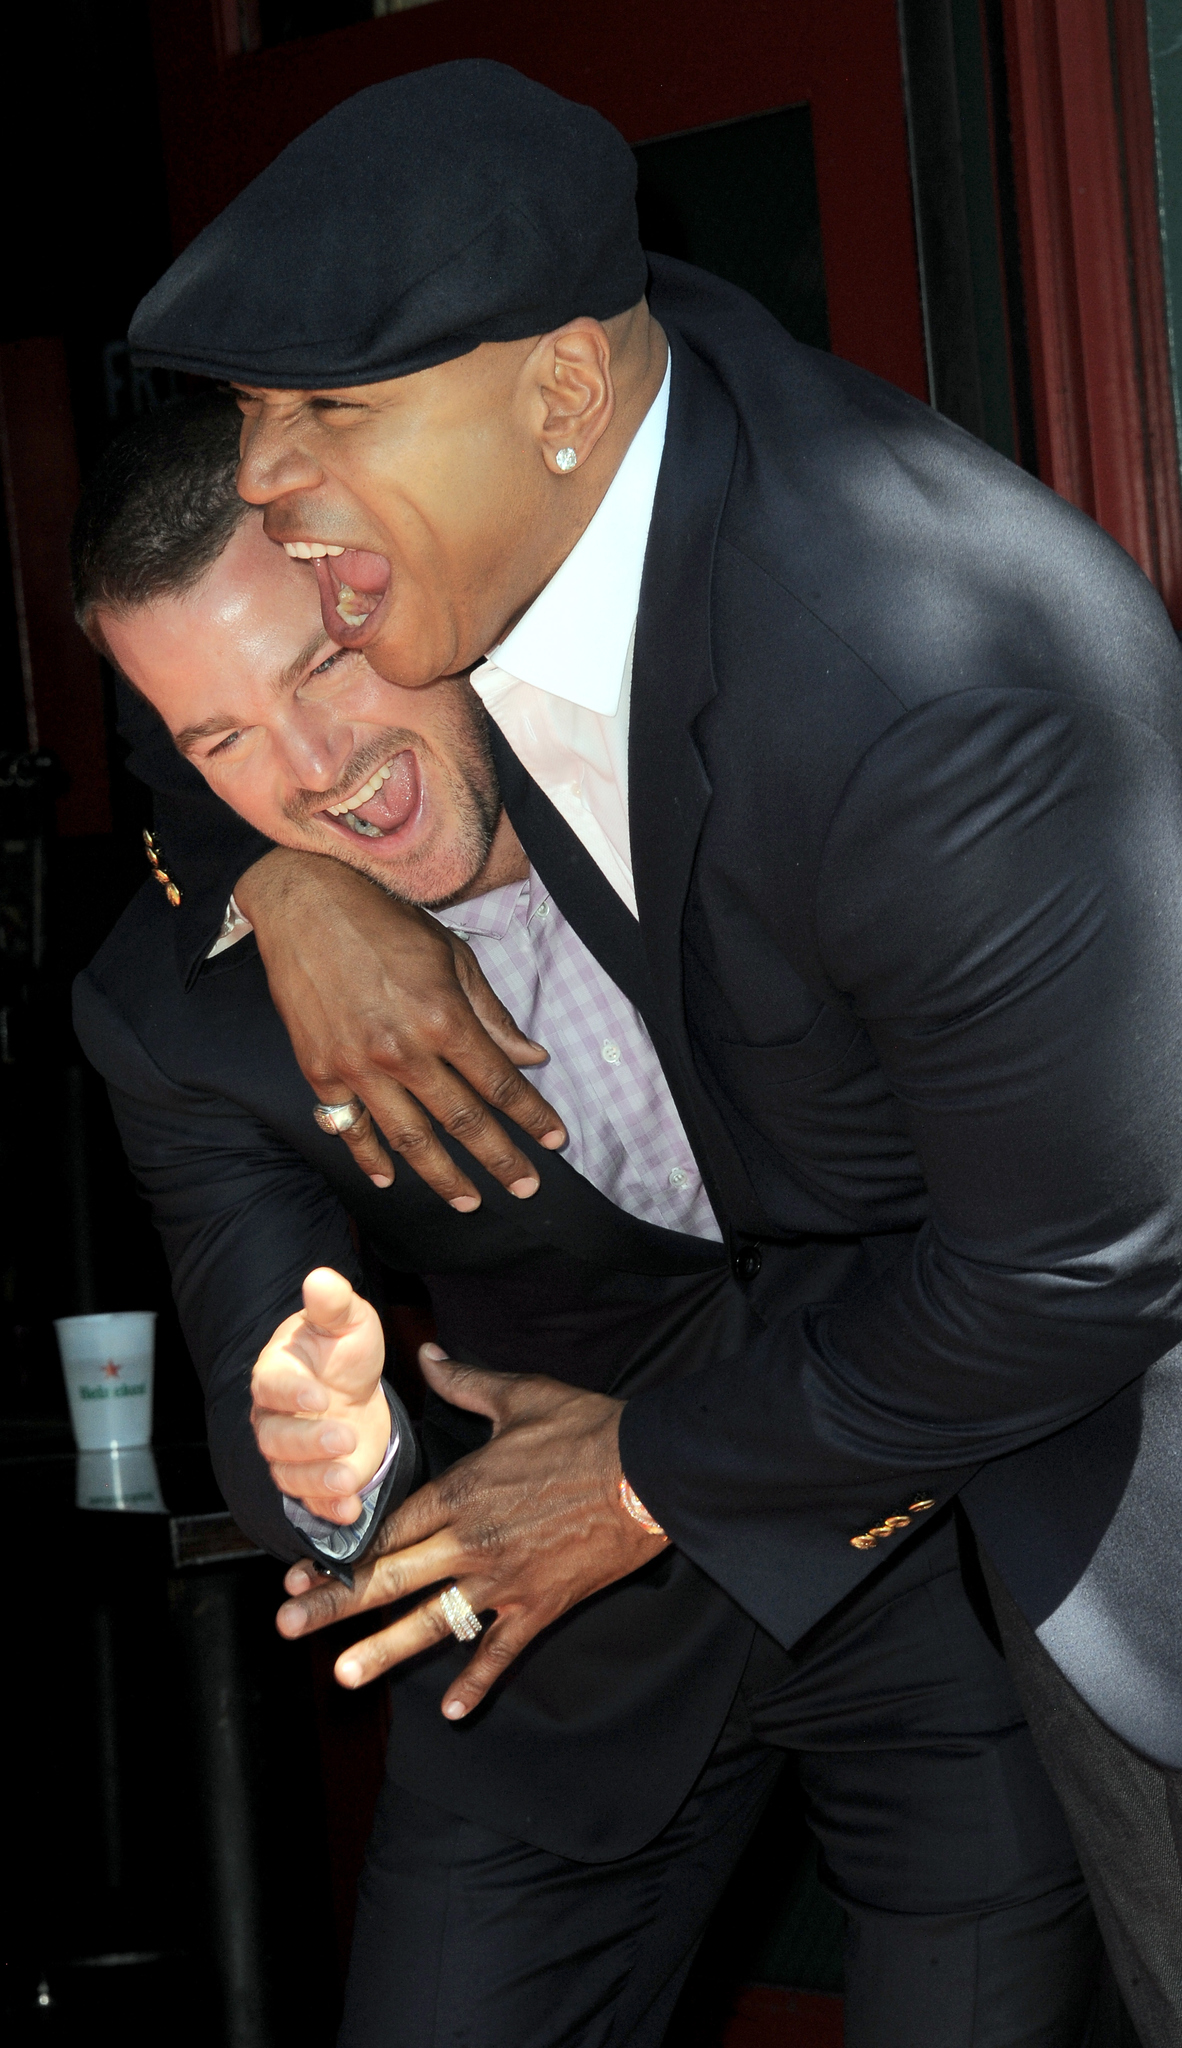 Chris O'Donnell and LL Cool J